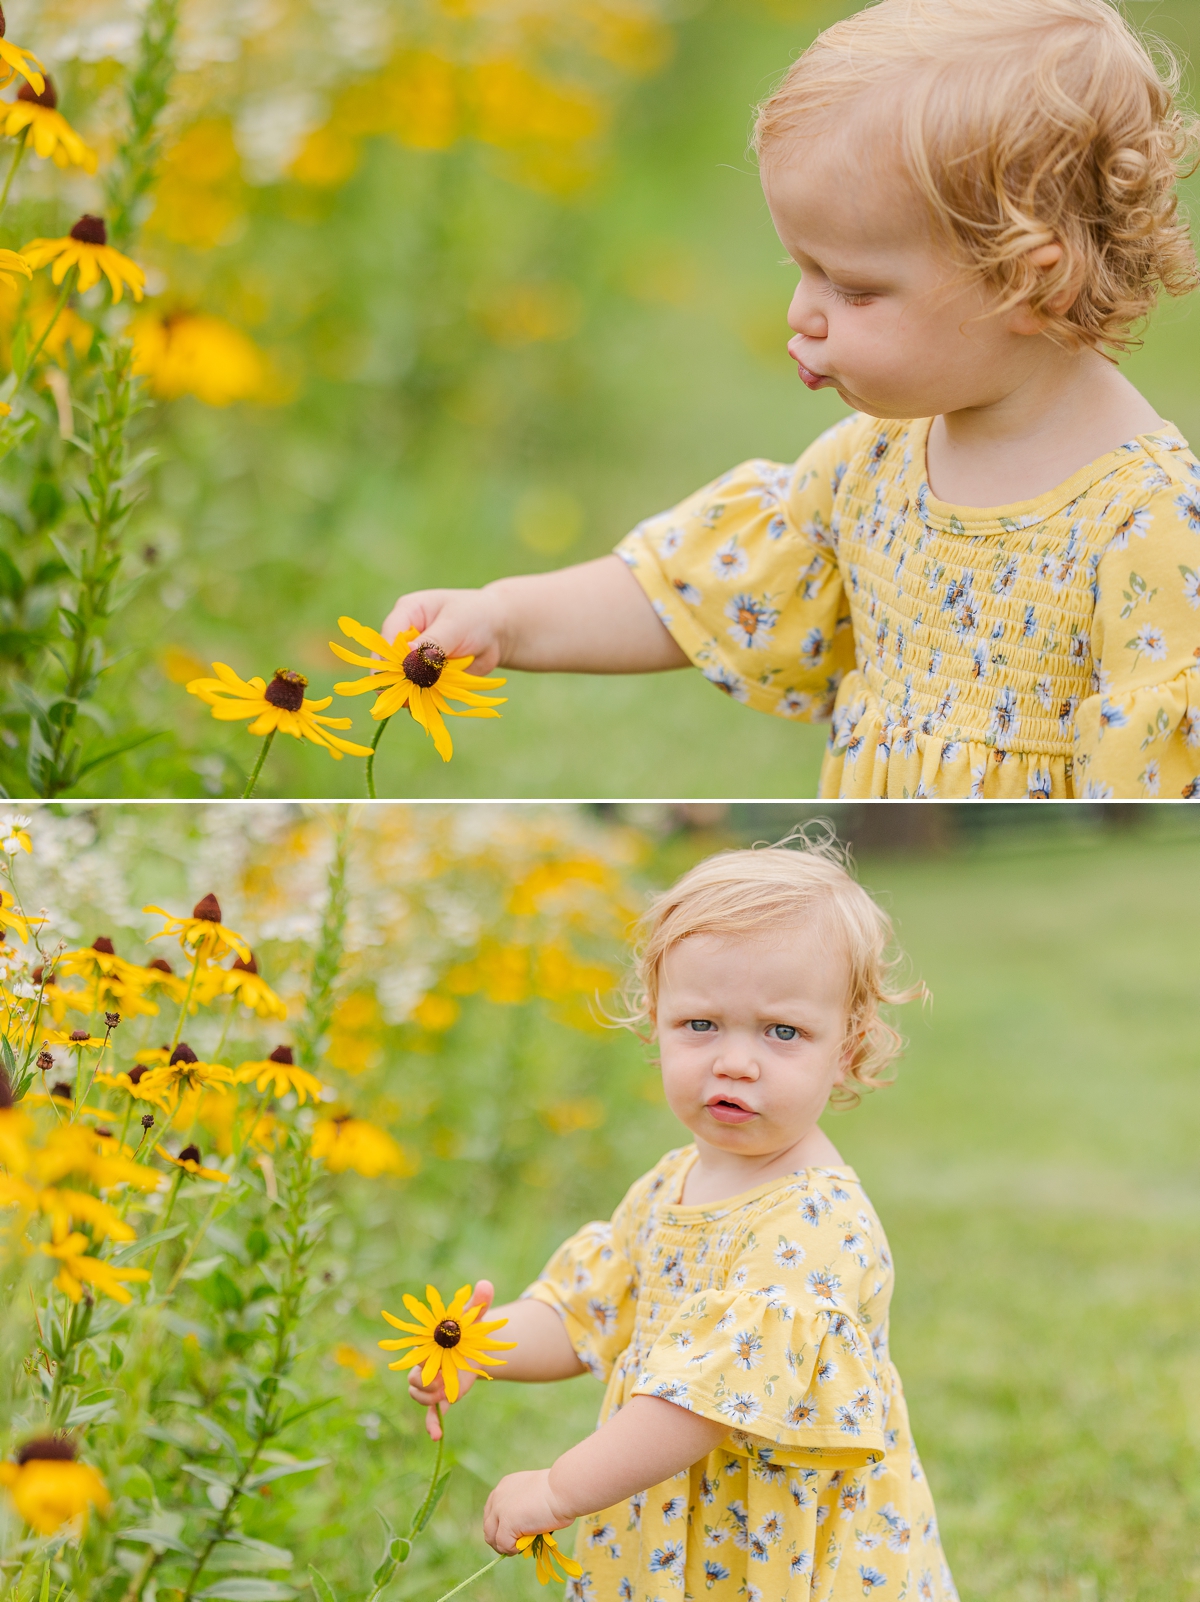 Lilah pondering a flower and looking confused at the camera